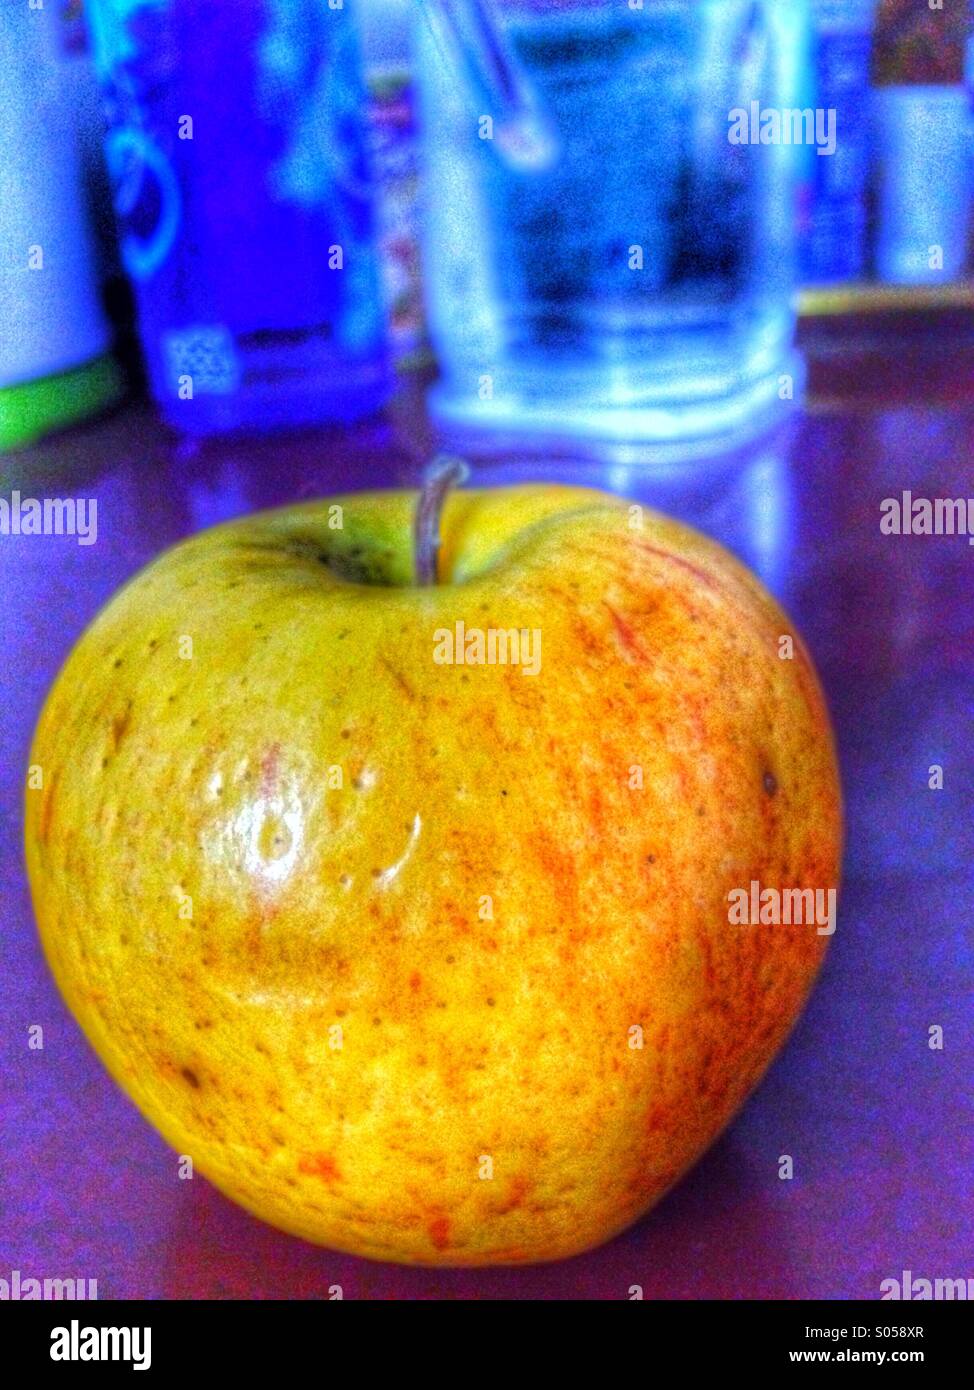 Captured this apple at our table.Love apples. Stock Photo